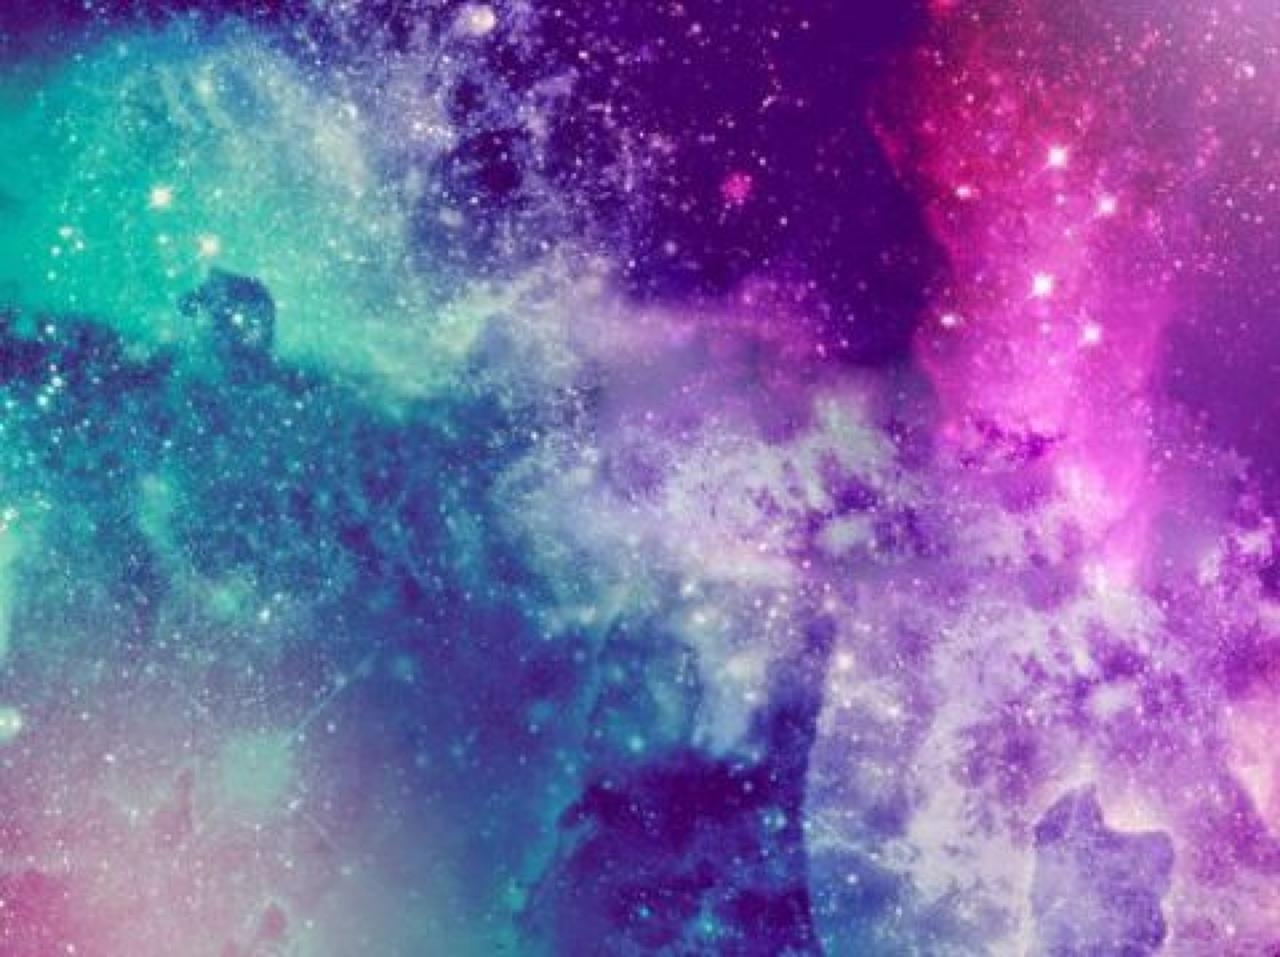 10 Best Pink Galaxy Wallpaper Hd FULL HD 1920×1080 For PC Background